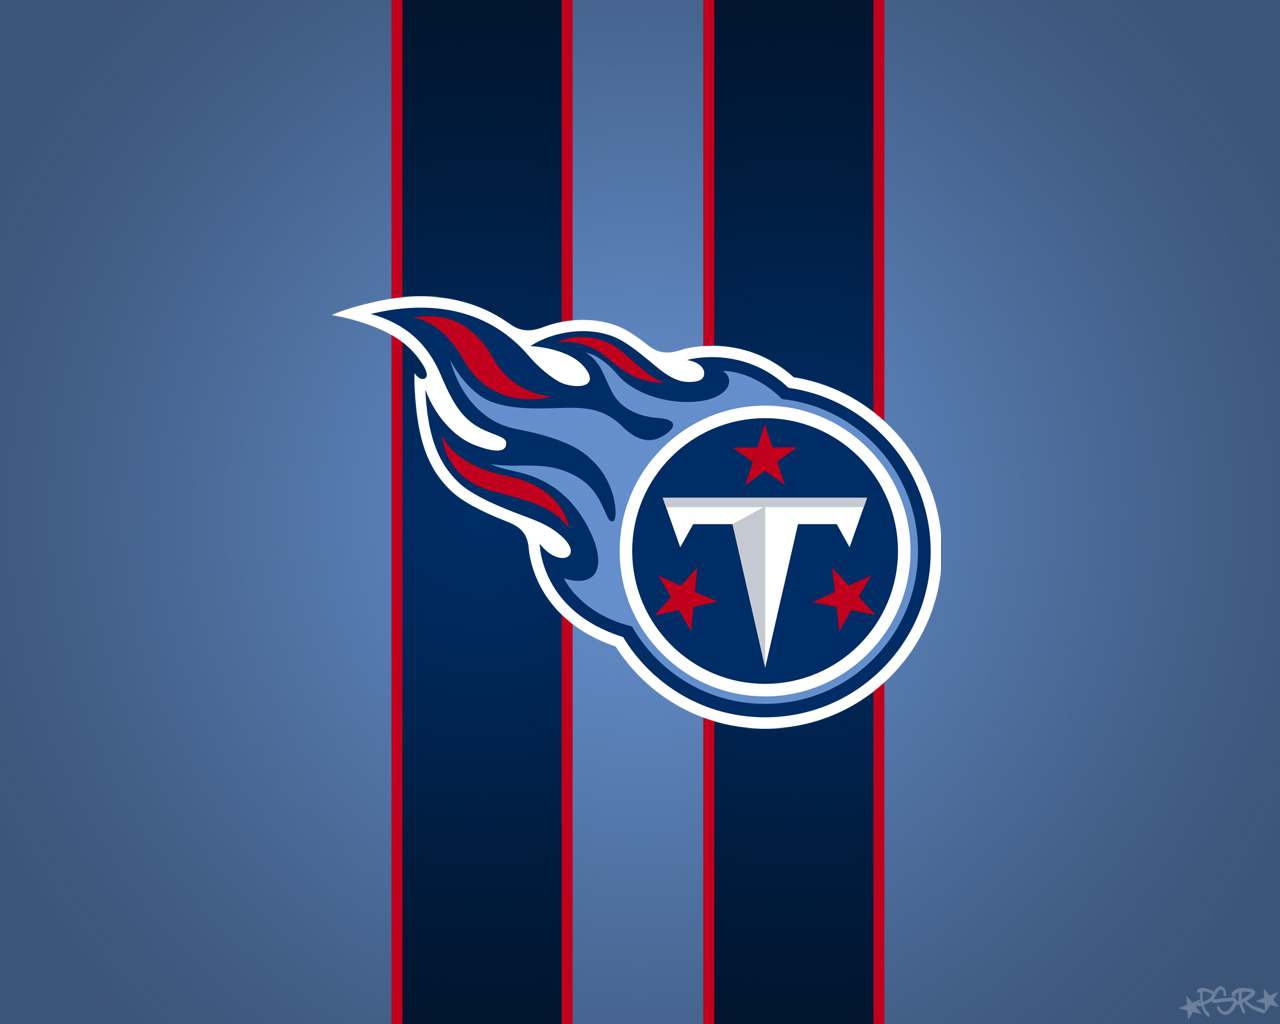 The Ultimate Tennessee Titans Wallpaper Collection